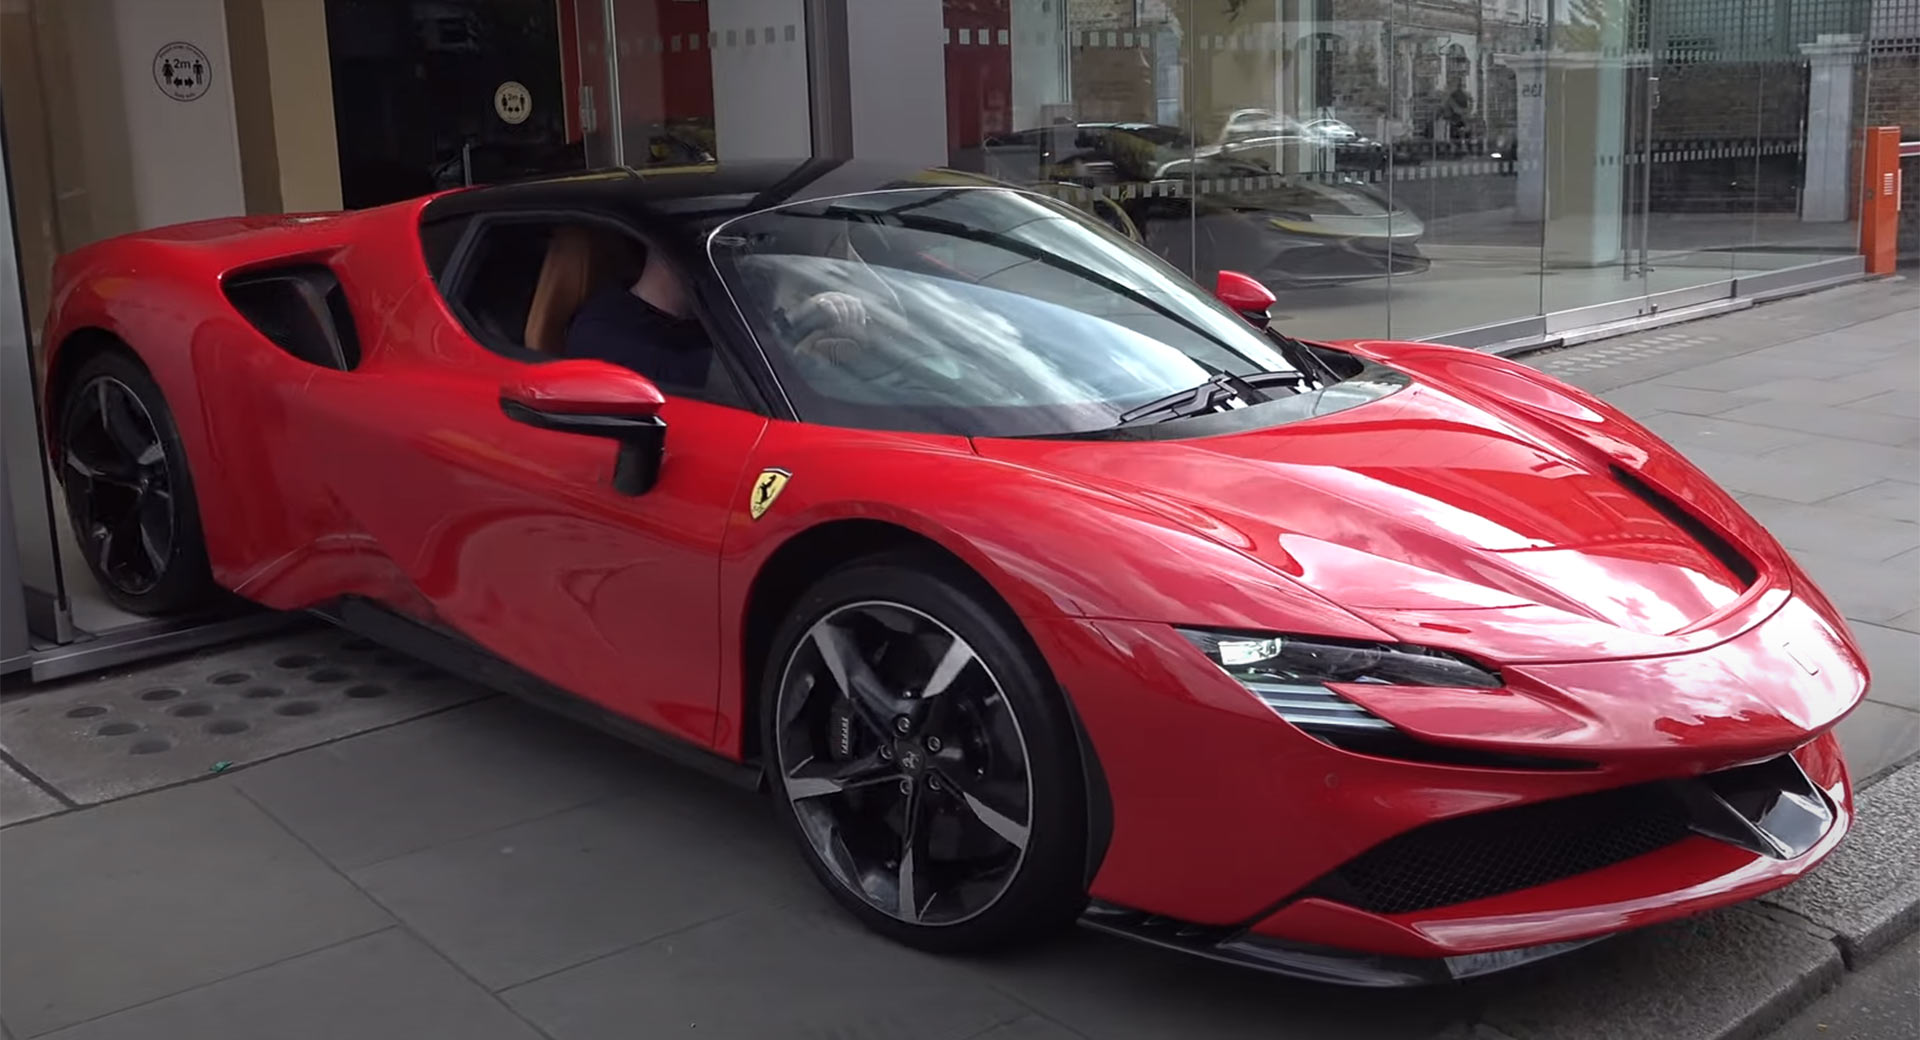 Rosso Corsa Ferrari SF90 Stradale Gets Delivered In London | Carscoops